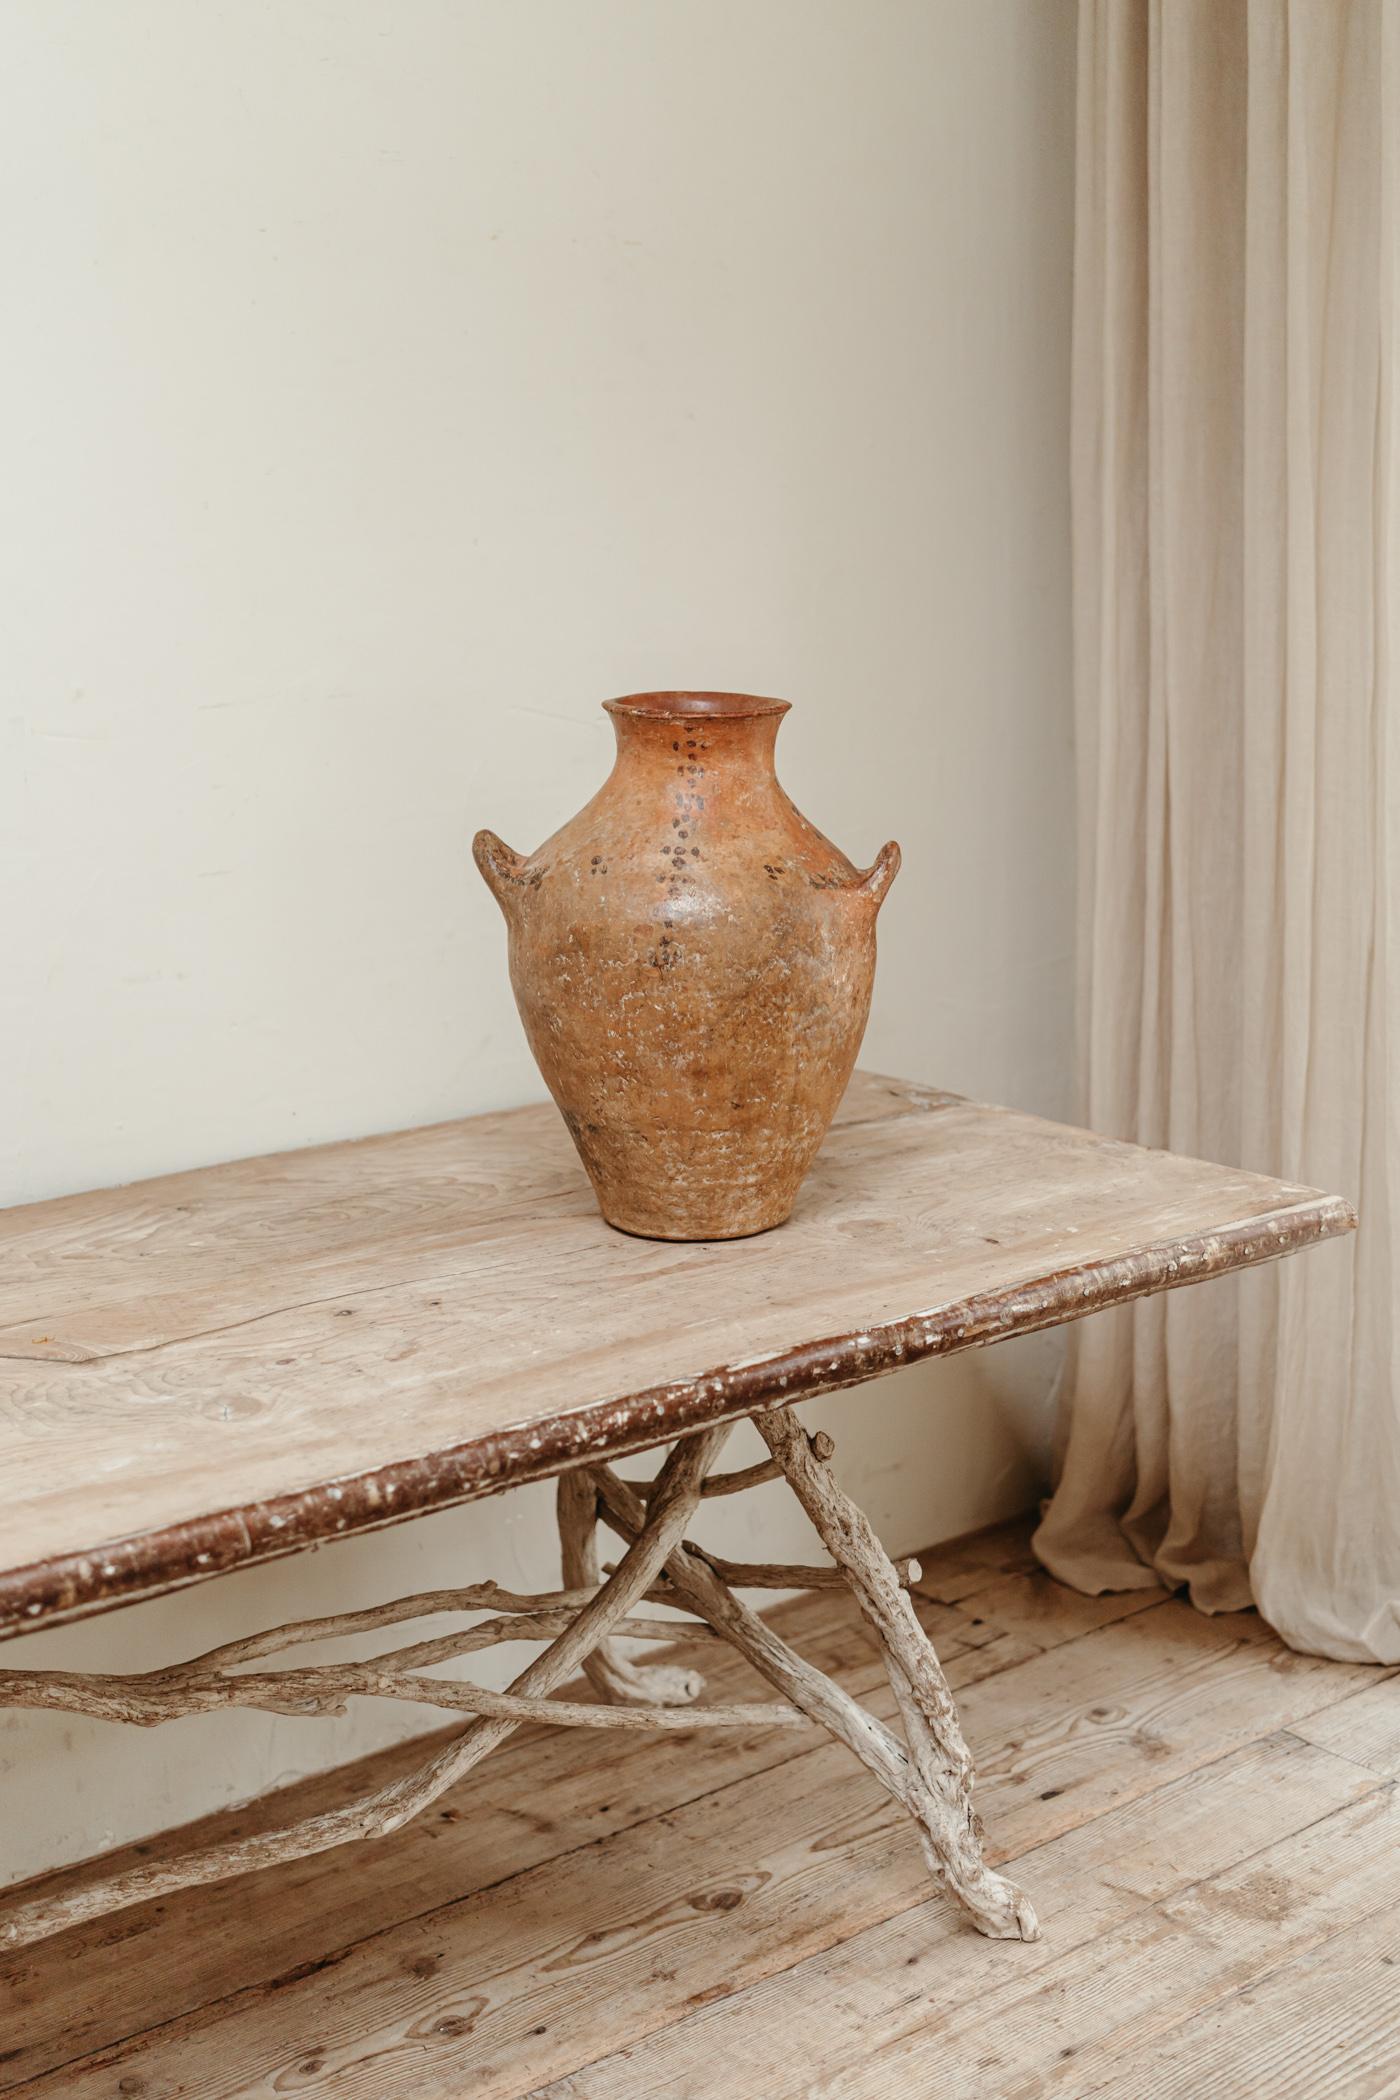 Wonderful patina on this berber pottery urn / vase highly decorative item in both a classic or contemporary interior.